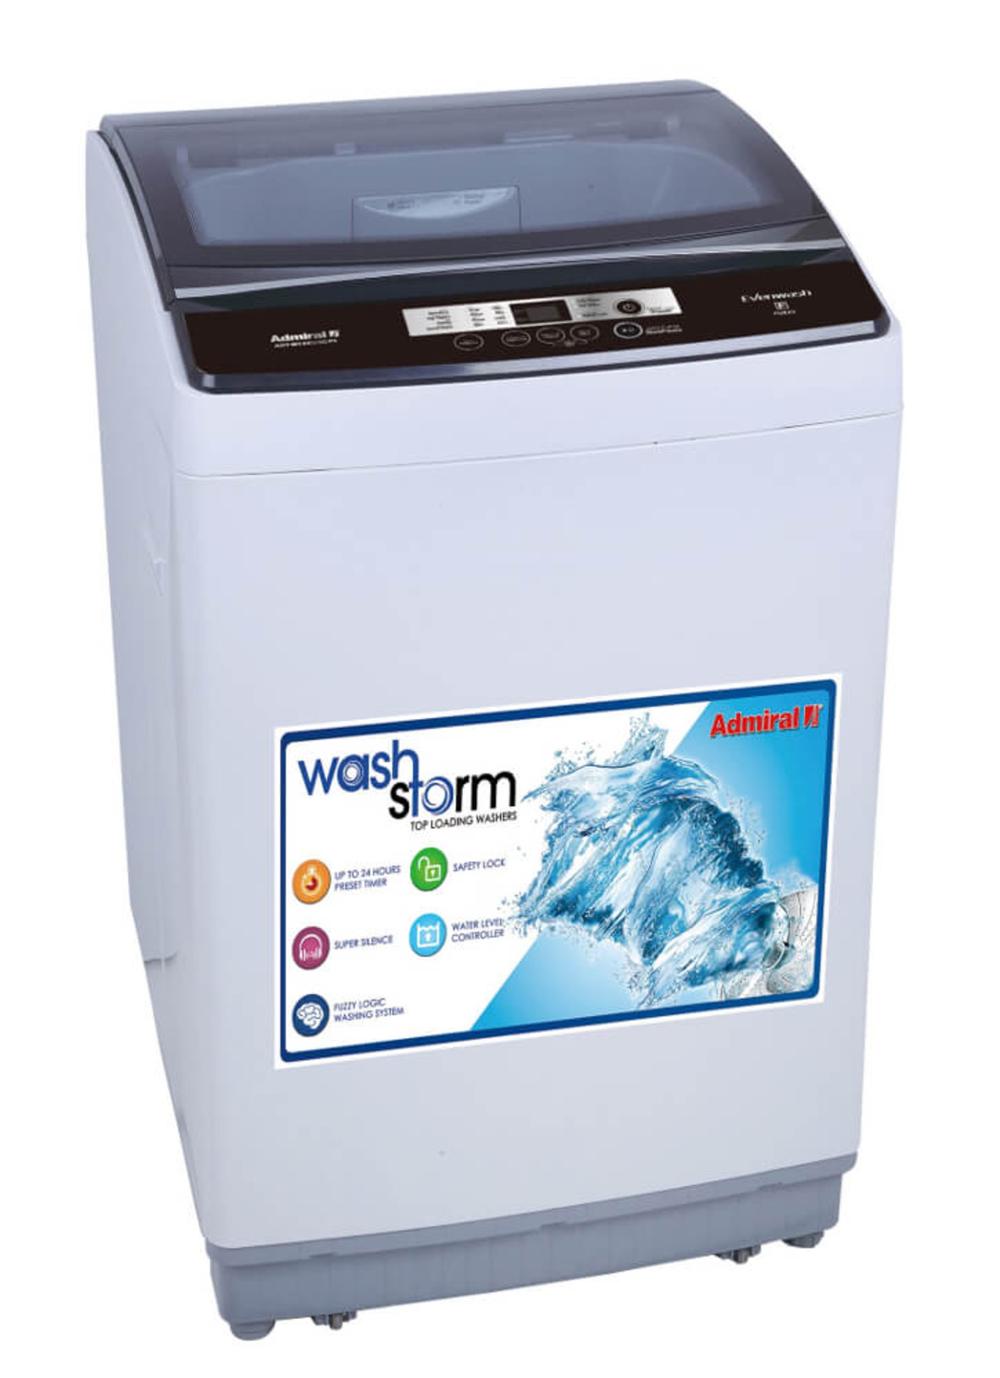 Admiral 7kg Top Load Washer, Fuzzy logic, 8 Programs, safety lock - Modern Electronics